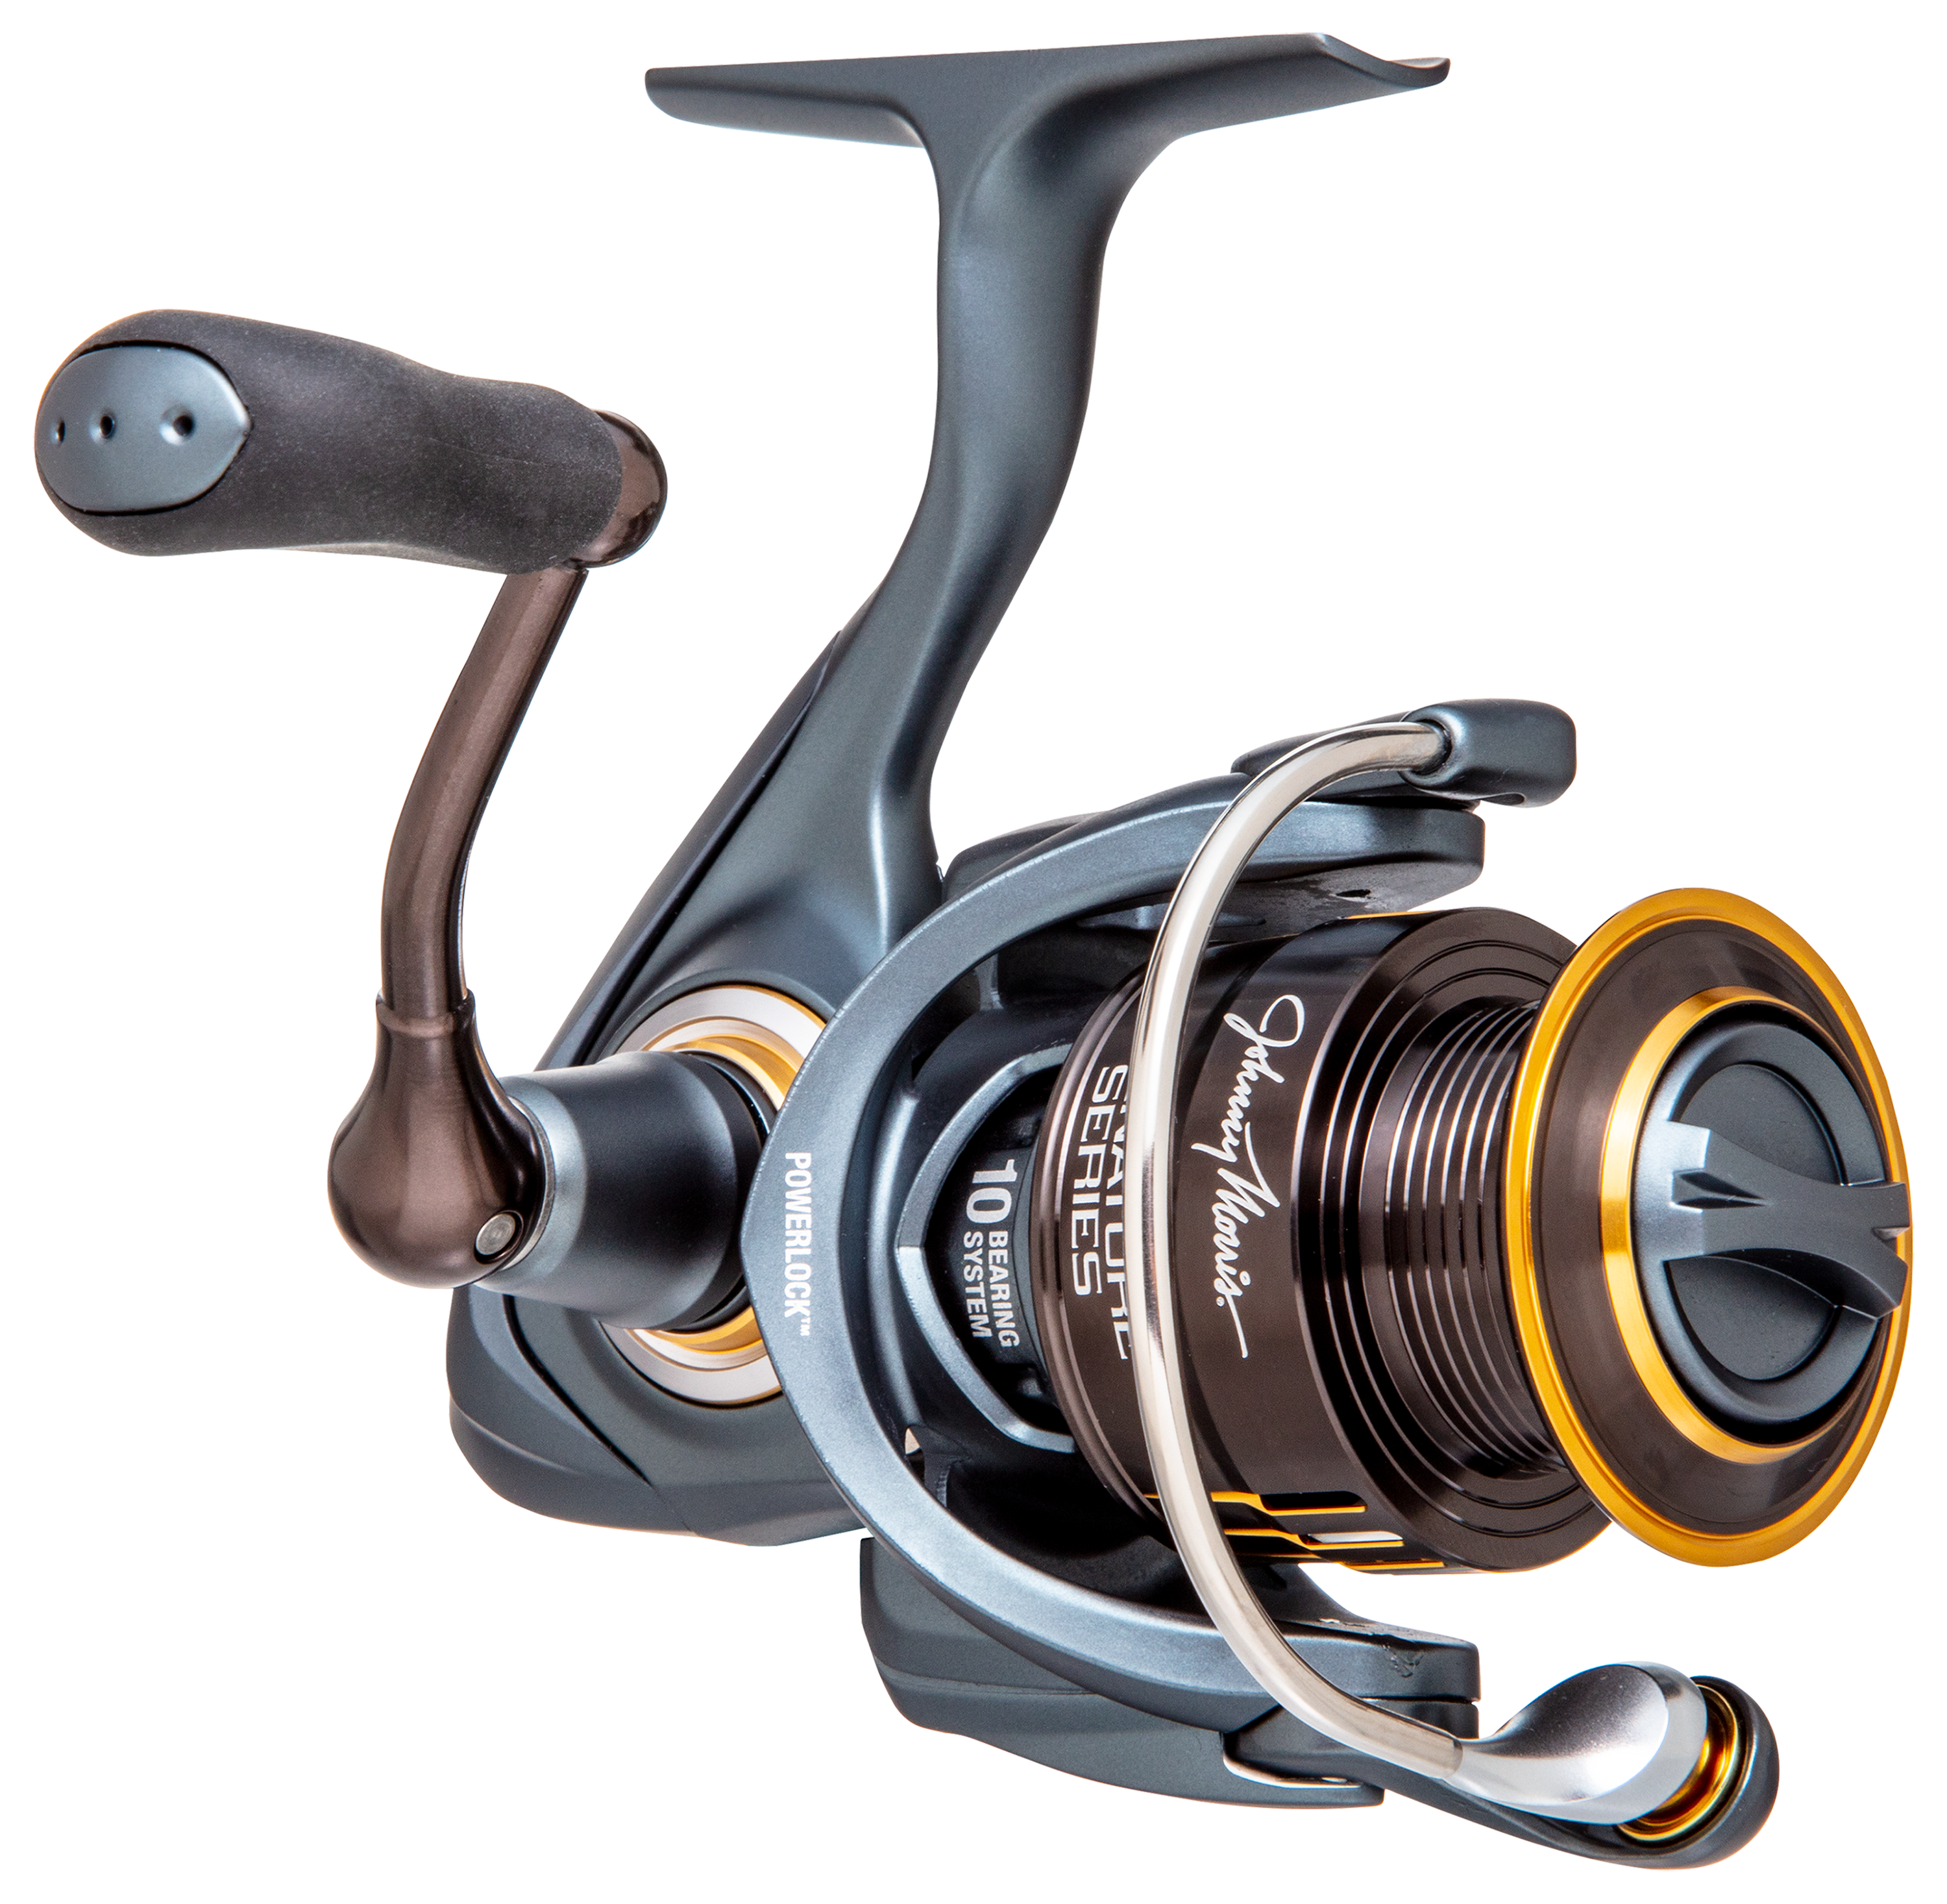 Bass Pro Shops Johnny Morris Signature Series Spinning Reel - 6.0:1 - Reel Size 3000